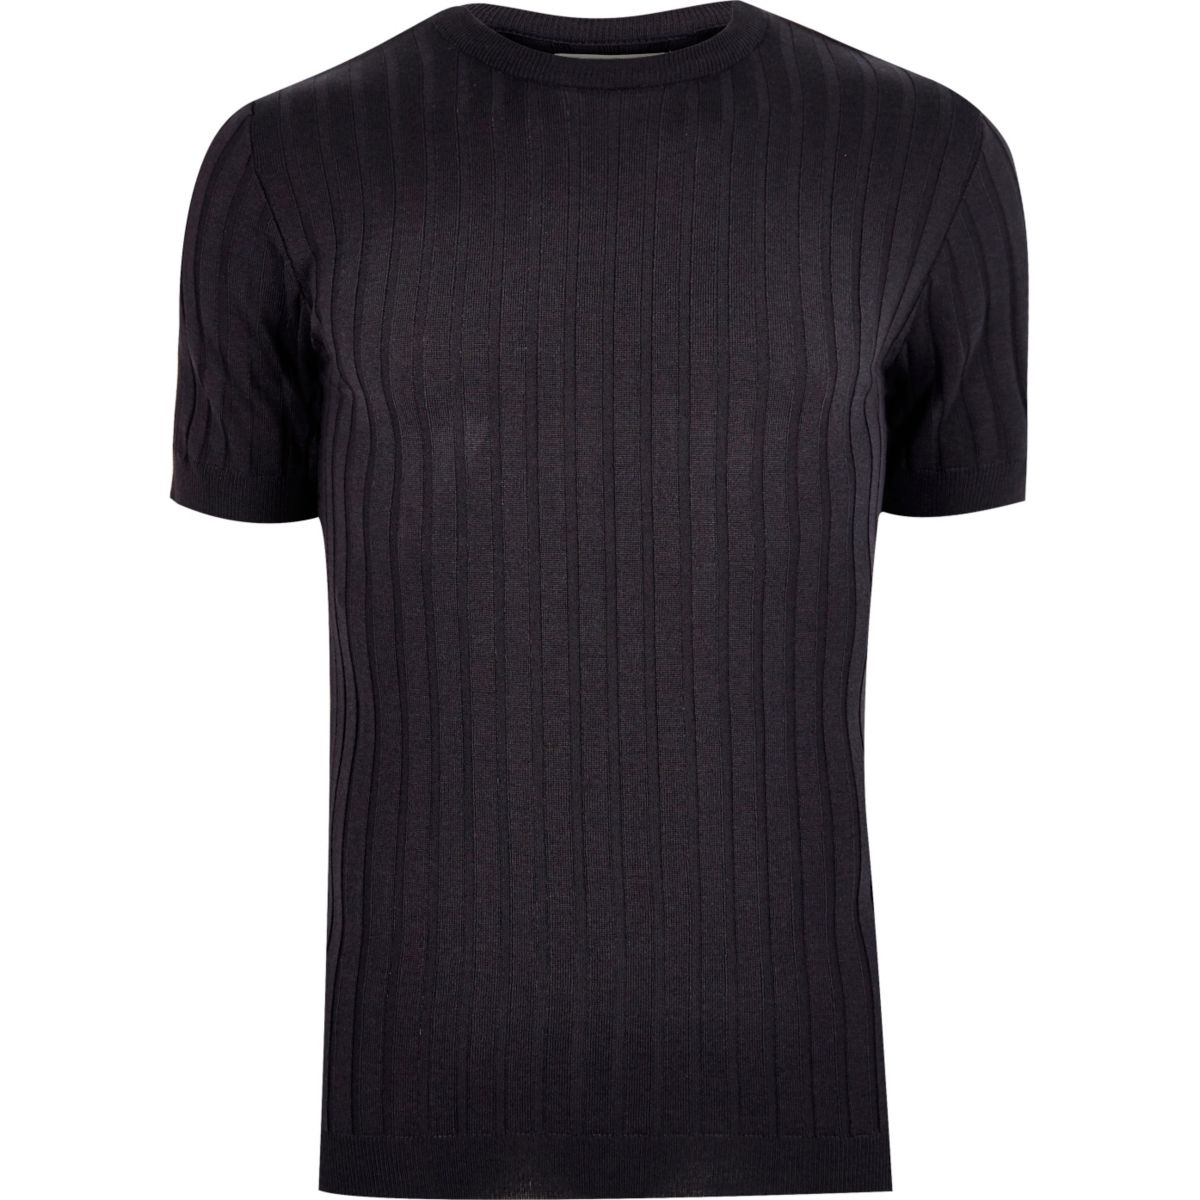 Navy chunky ribbed muscle fit T-shirt - T-Shirts & Vests - Sale - men